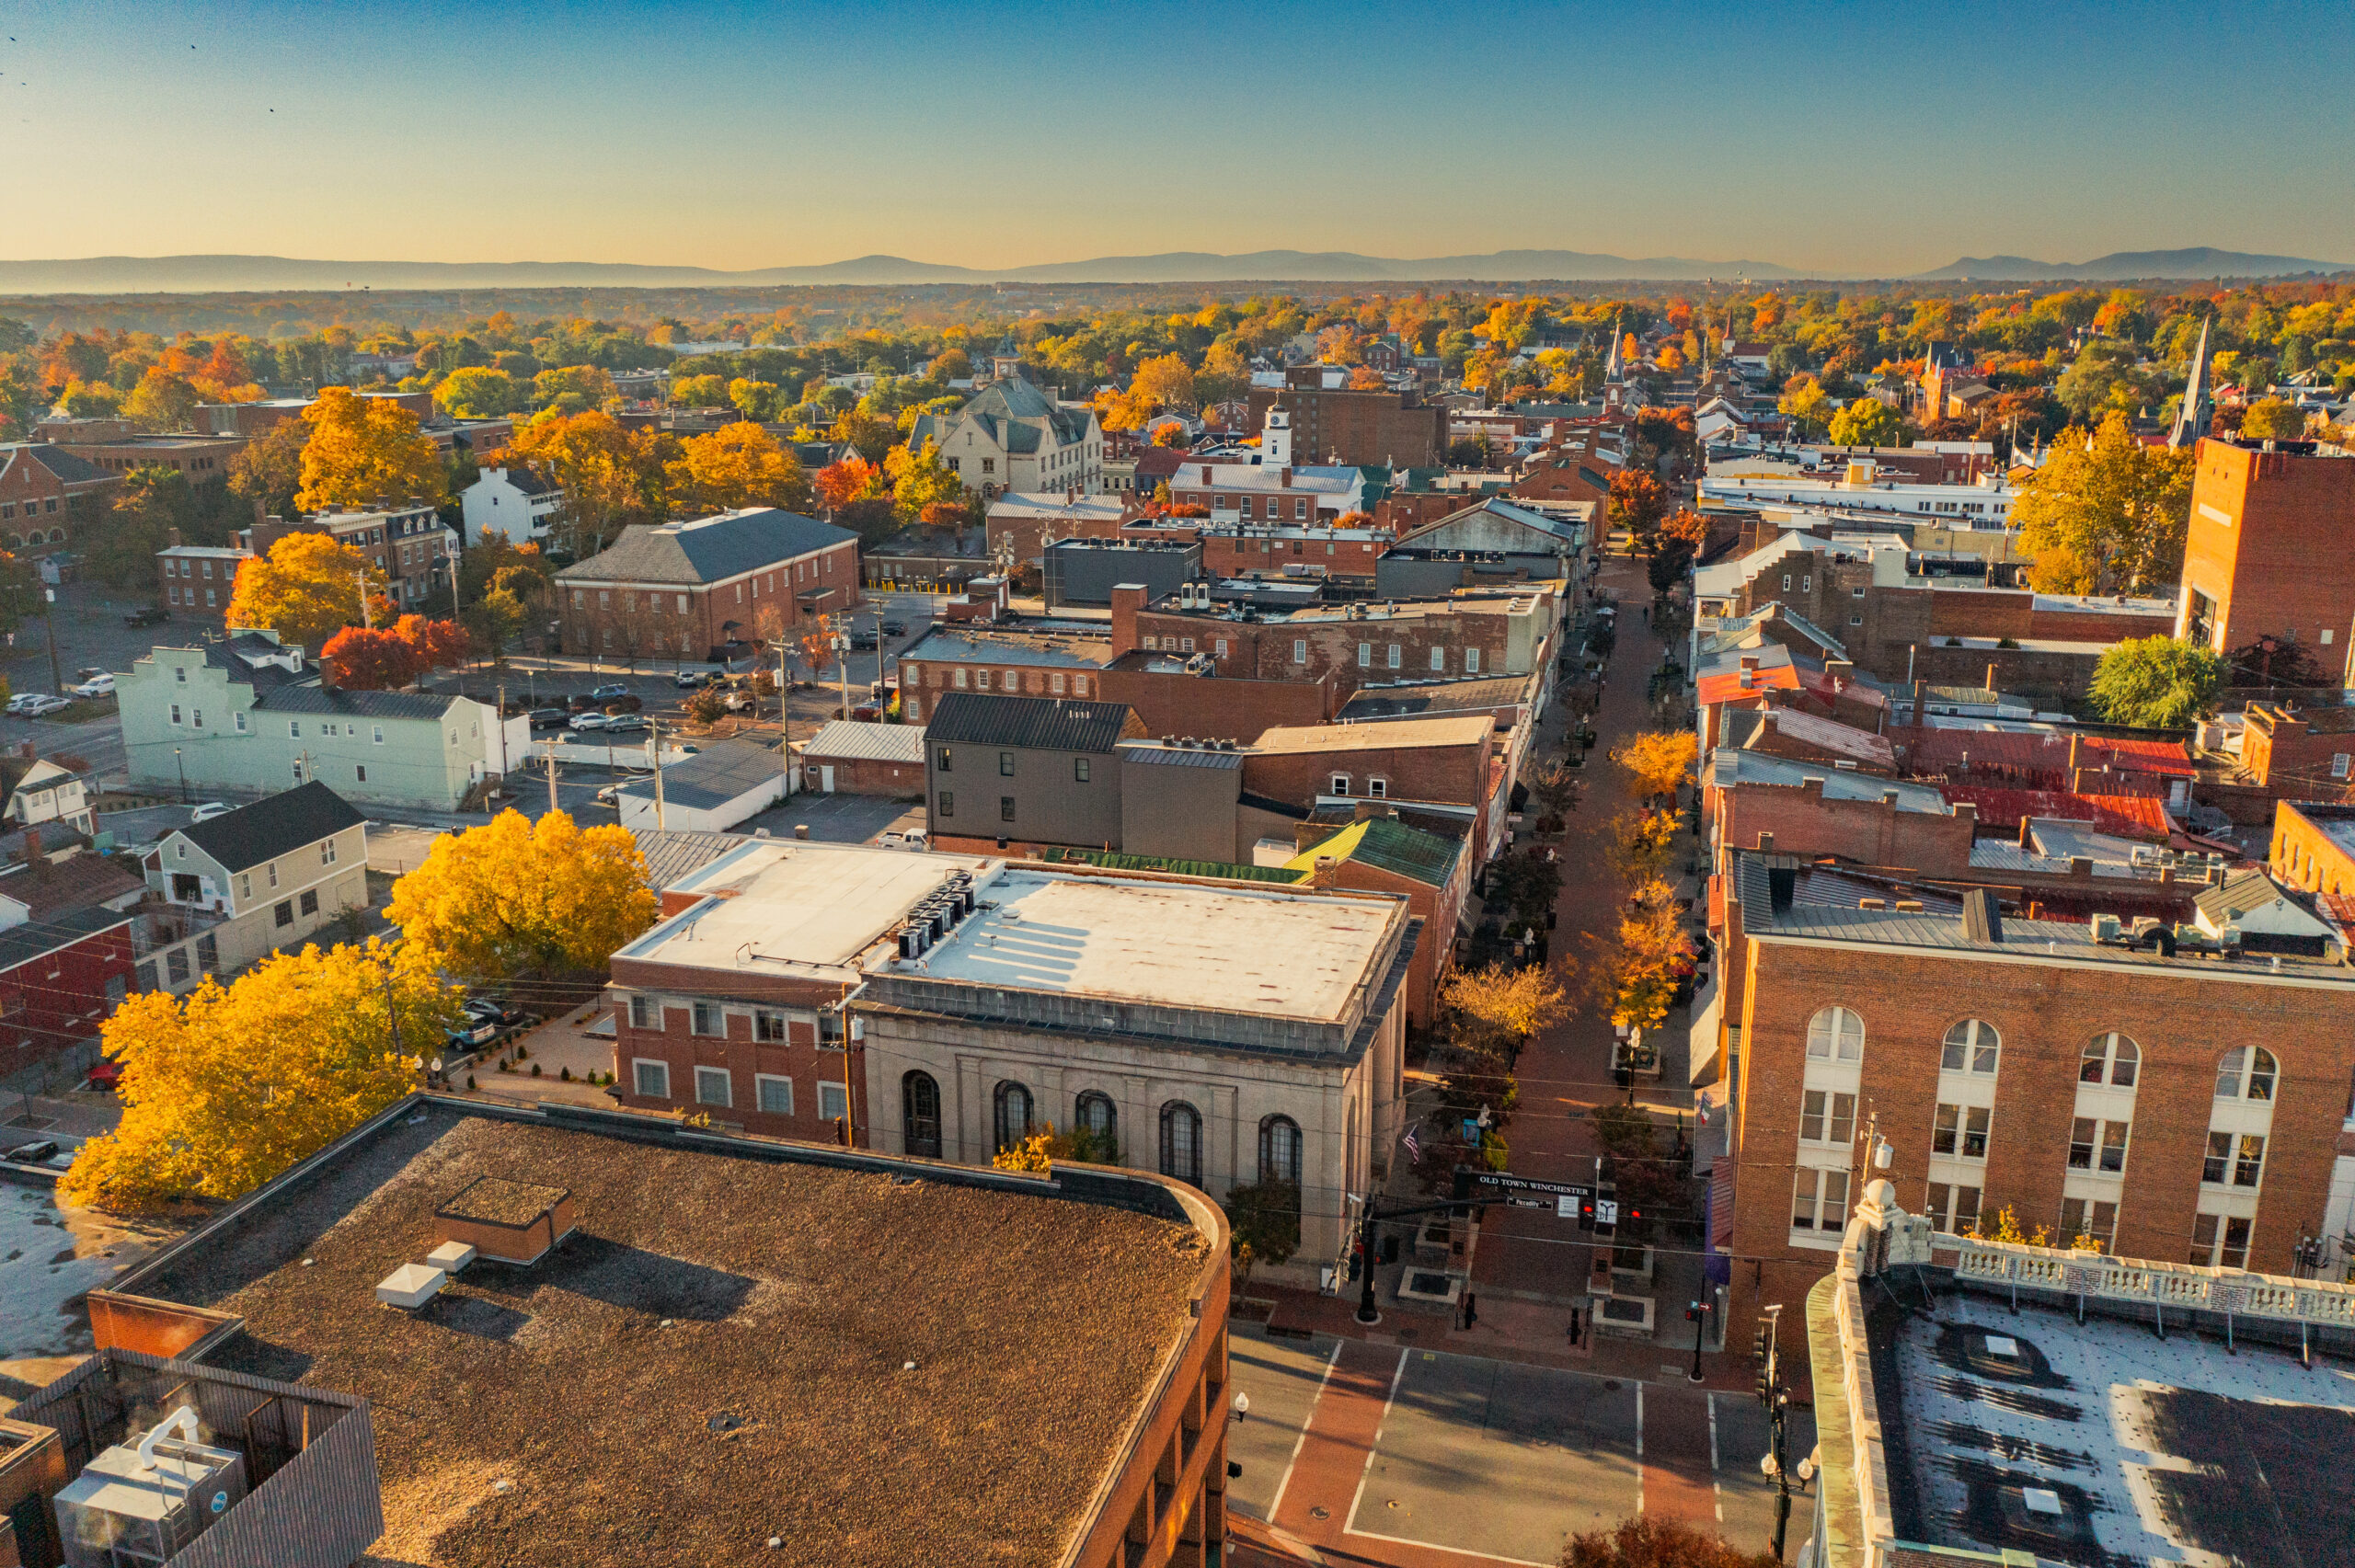 Old Town Winchester. Photo by Sam Dean and courtesy of Virginia Tourism Corporation.